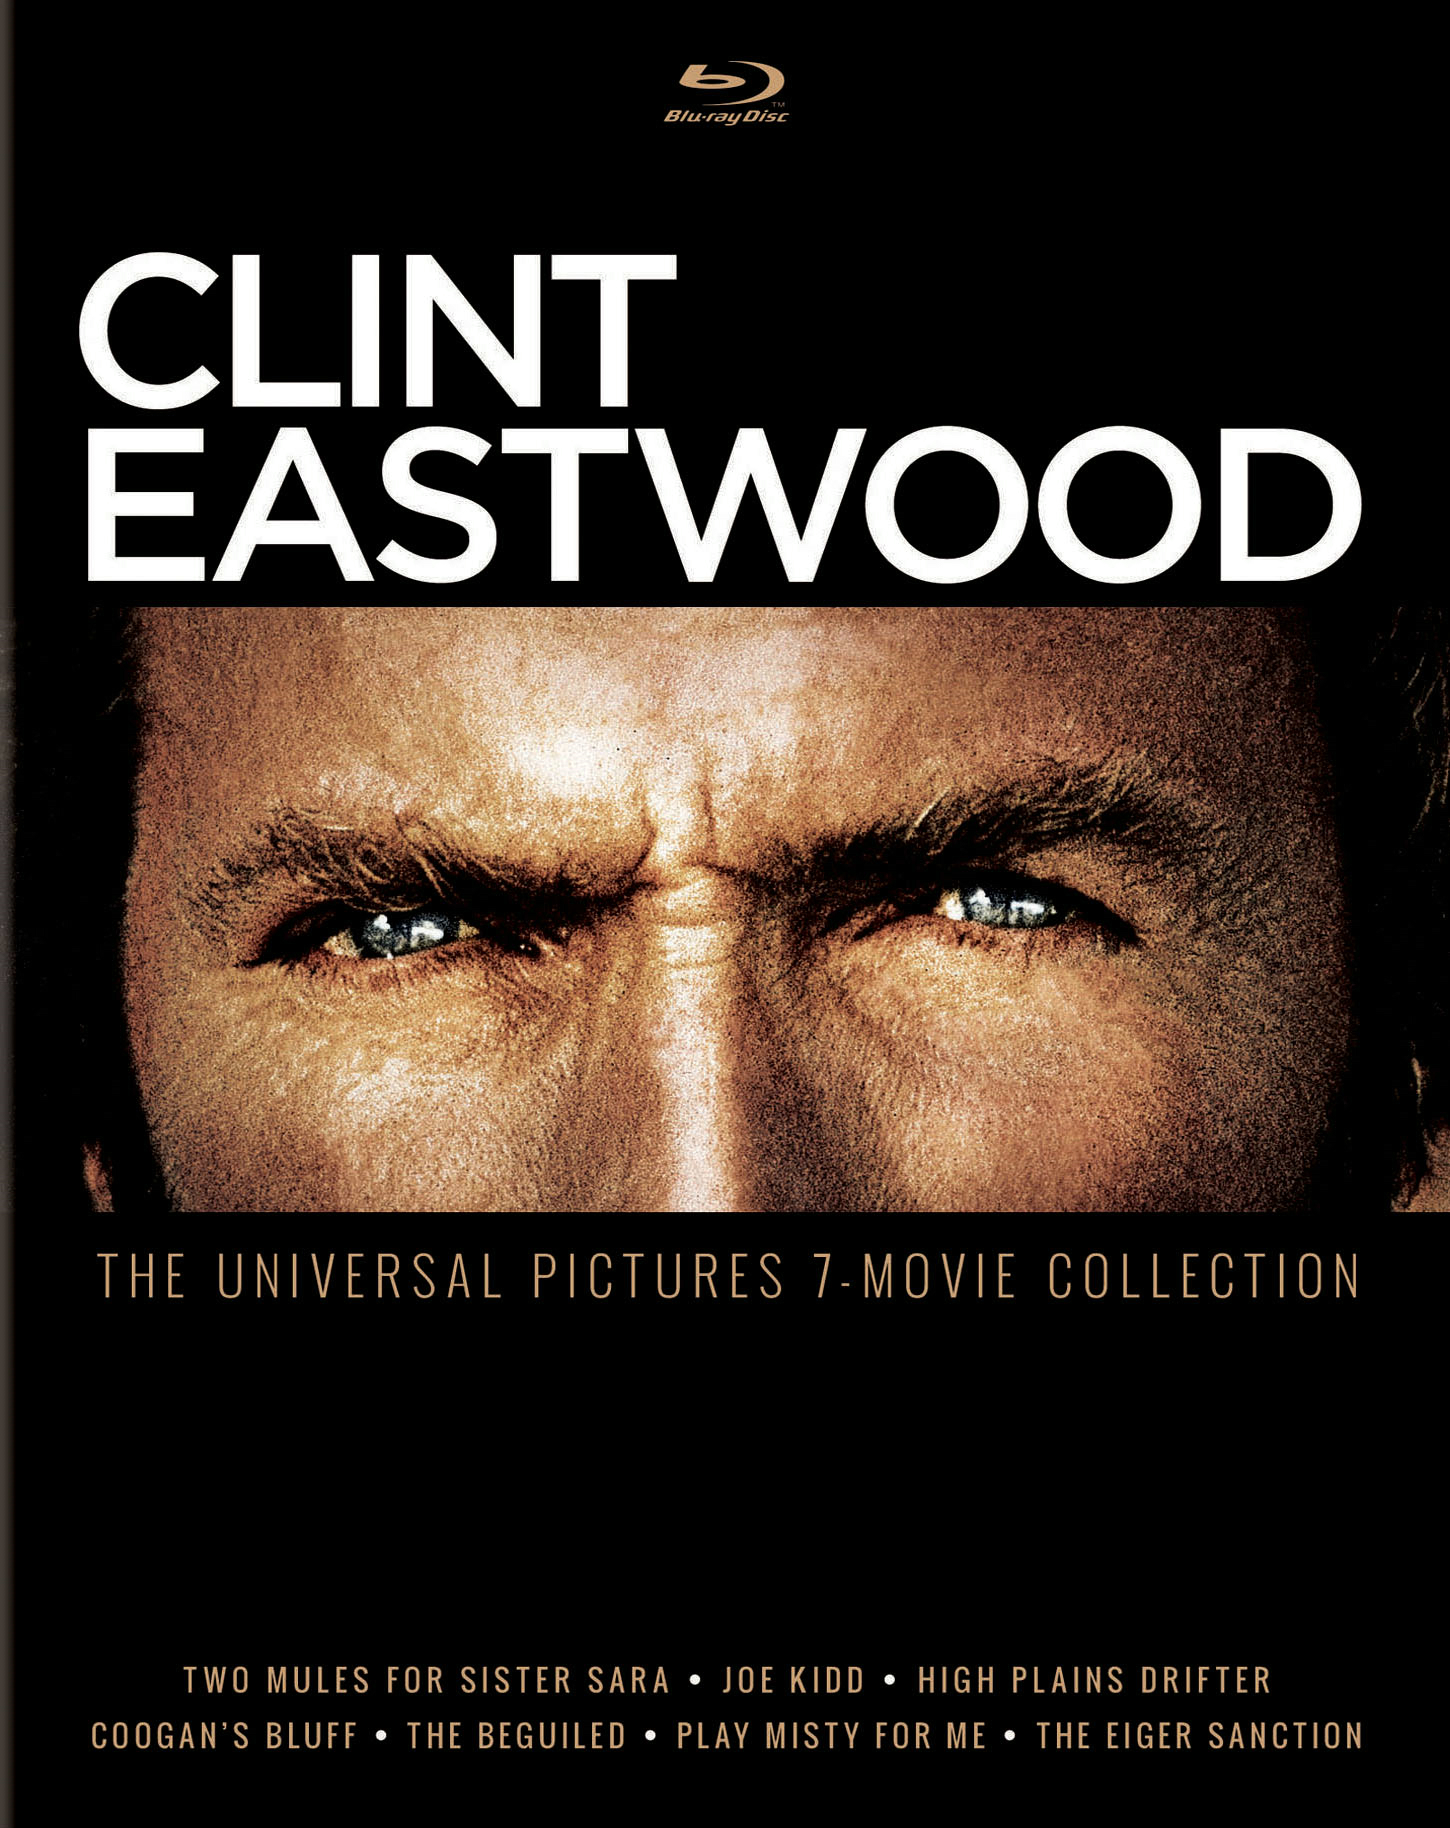 Clint Eastwood: The Universal Pictures 7-movie Collection (Blu-ray Set) - Blu-ray   - Western Movies On Blu-ray - Movies On GRUV